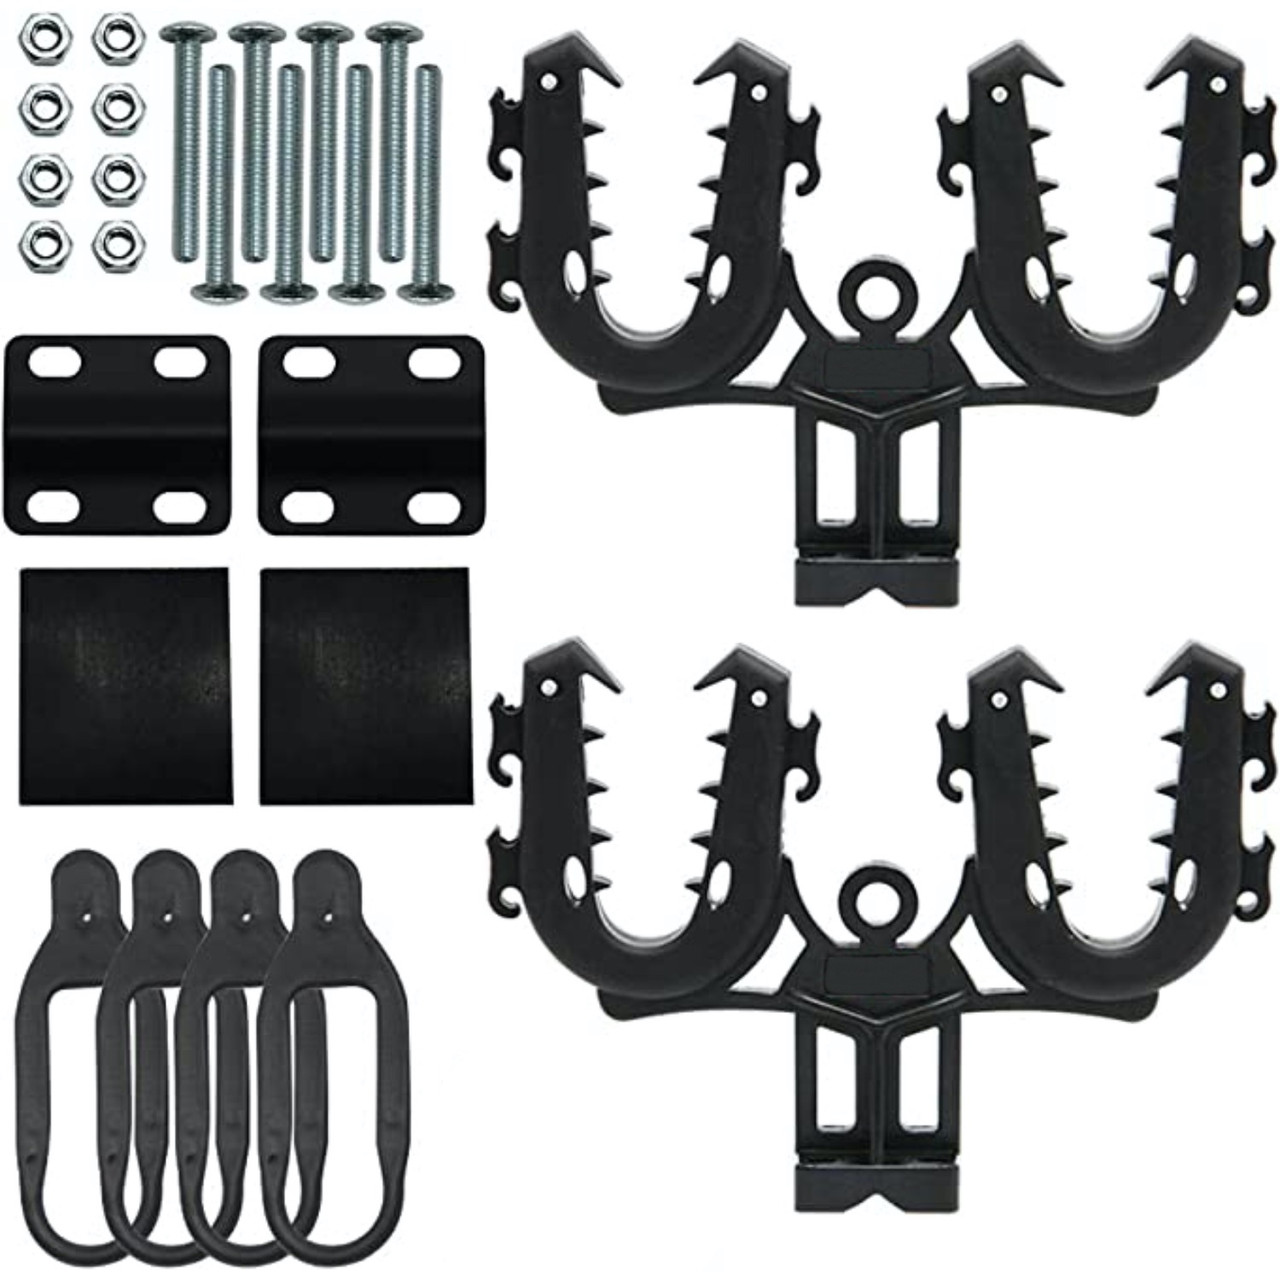 Bow / Long Gun Rack Universal Mount Installation Kit for Any Vehicle product image